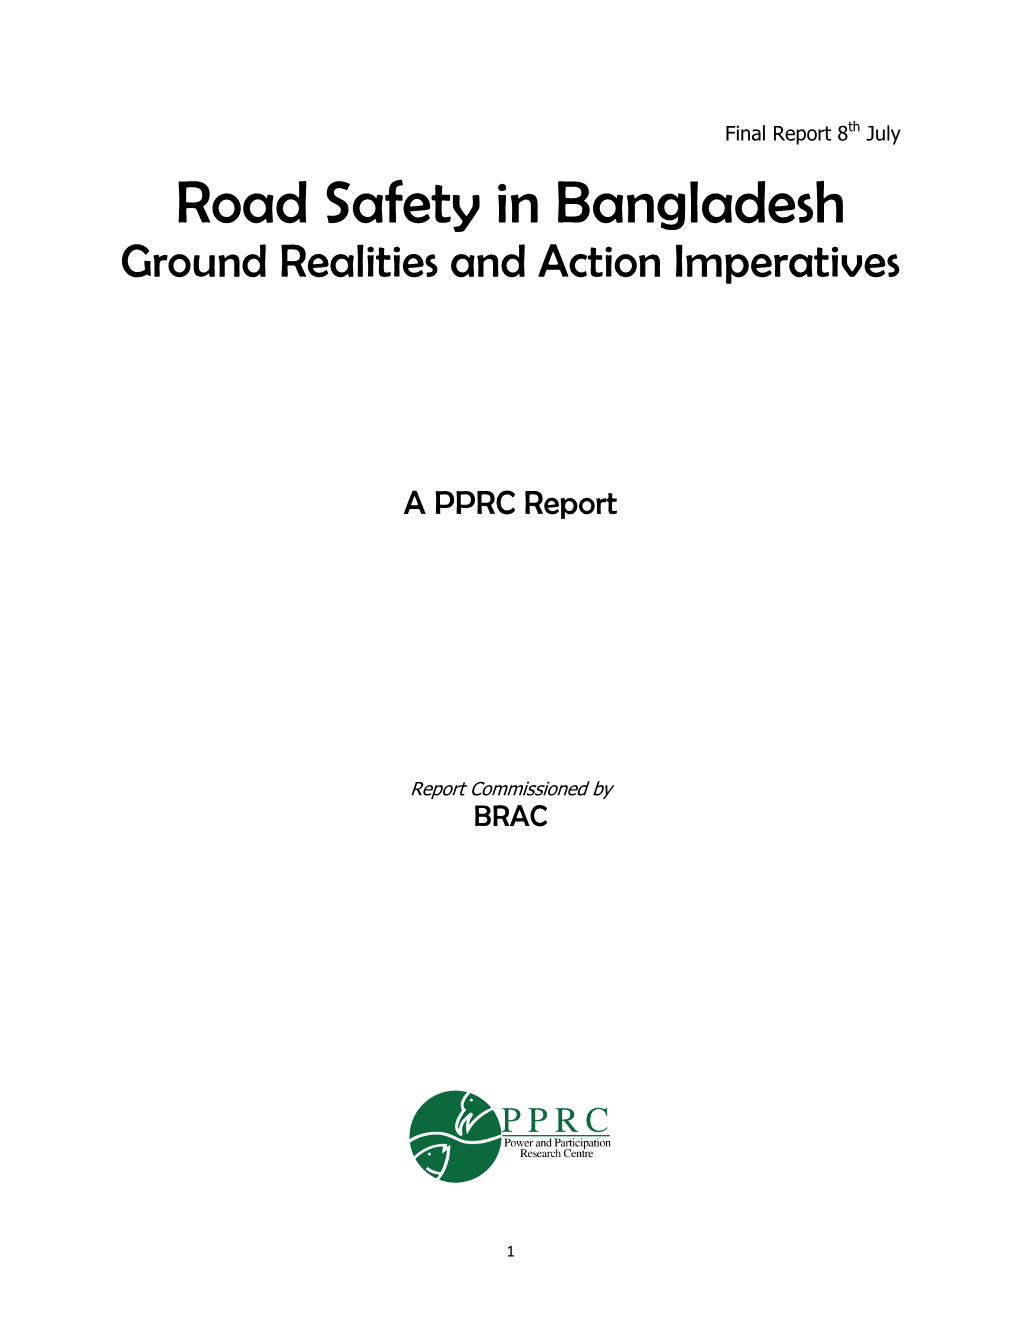 Road Safety in Bangladesh Ground Realities and Action Imperatives